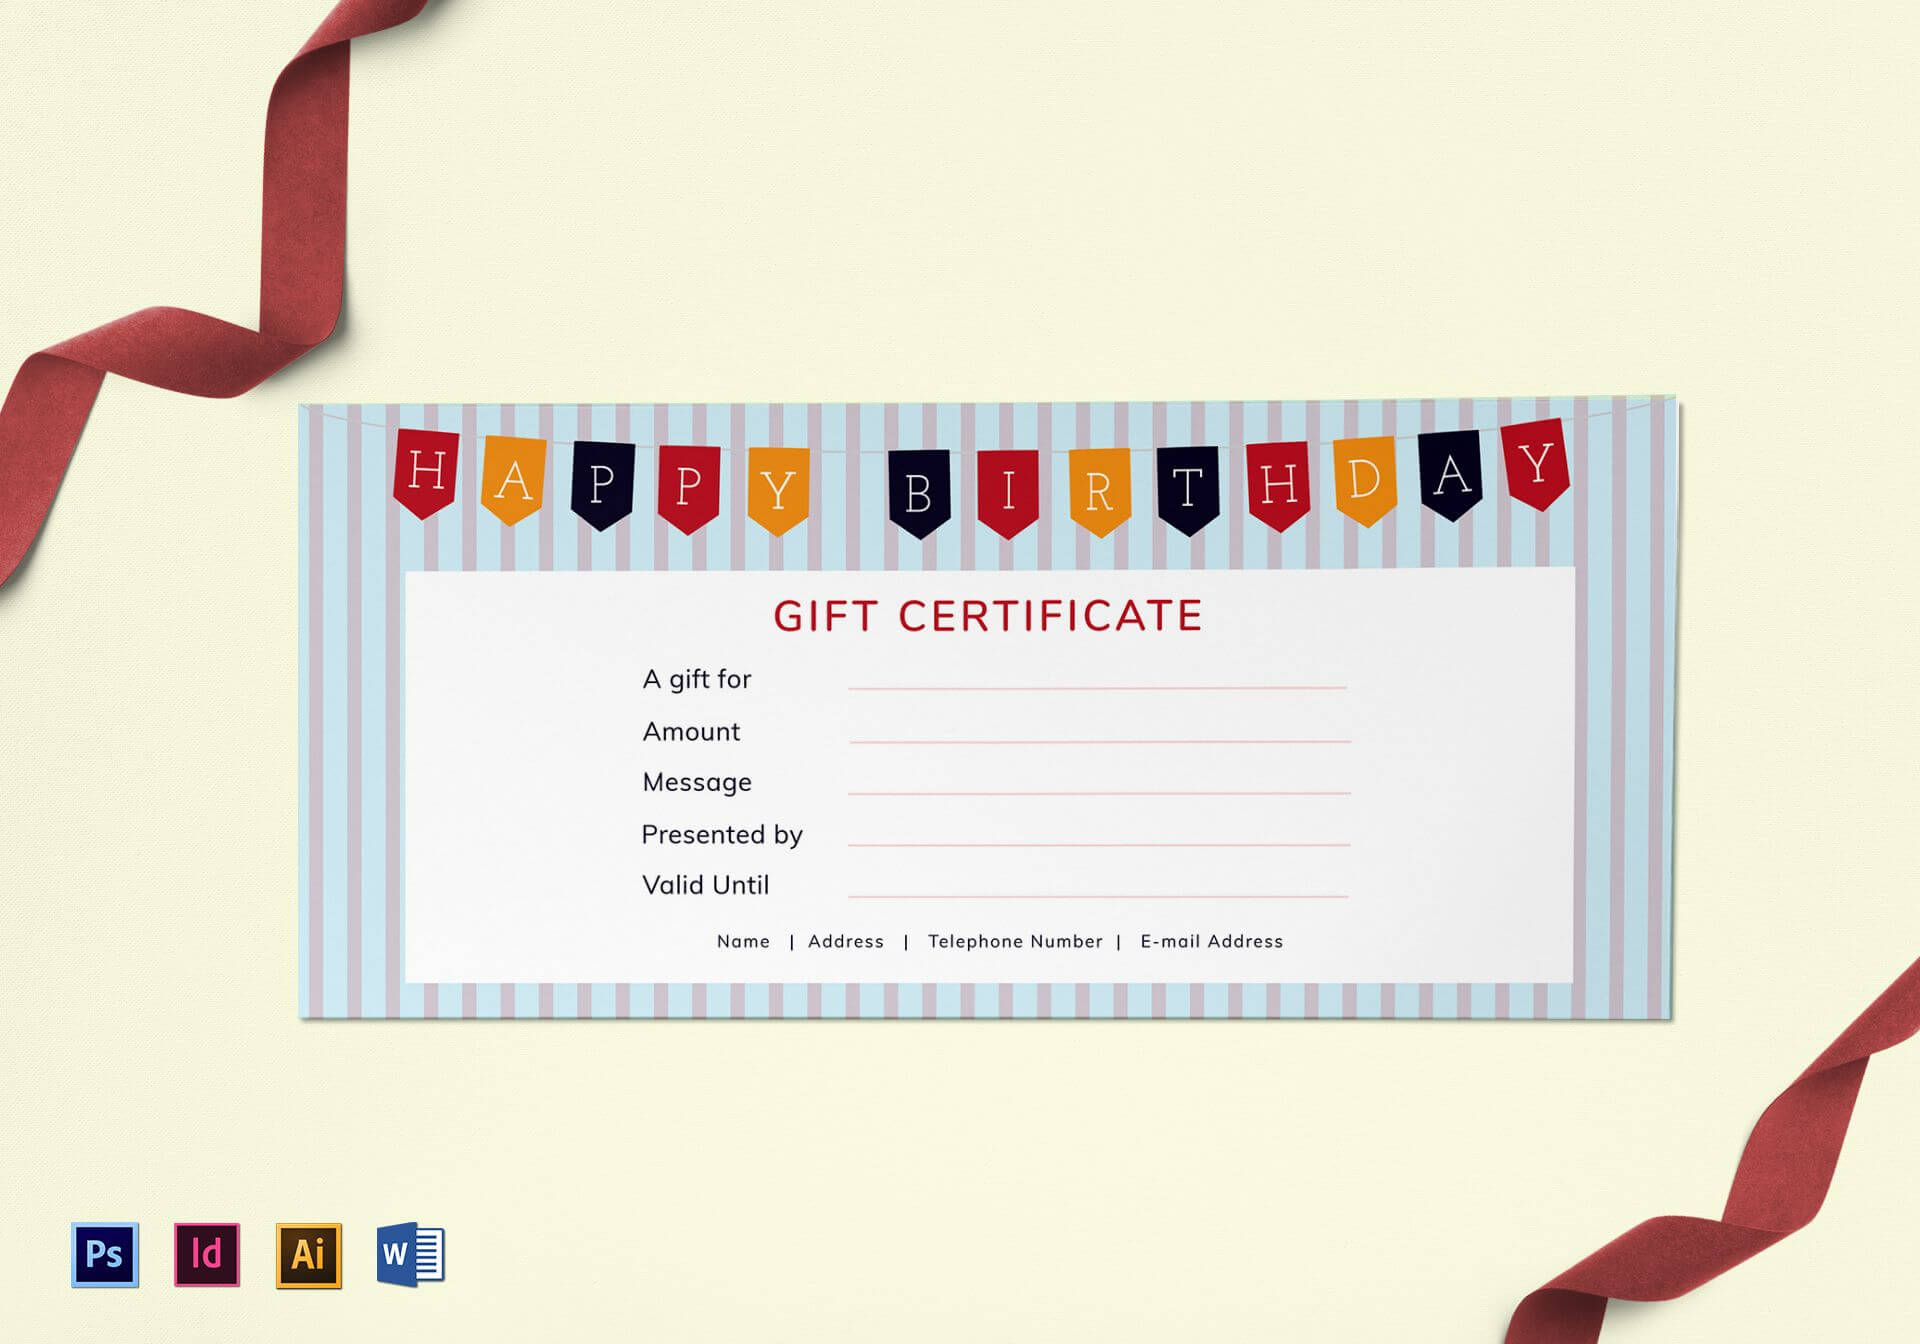 Happy Birthday Gift Certificate Template With Gift Certificate Template Indesign